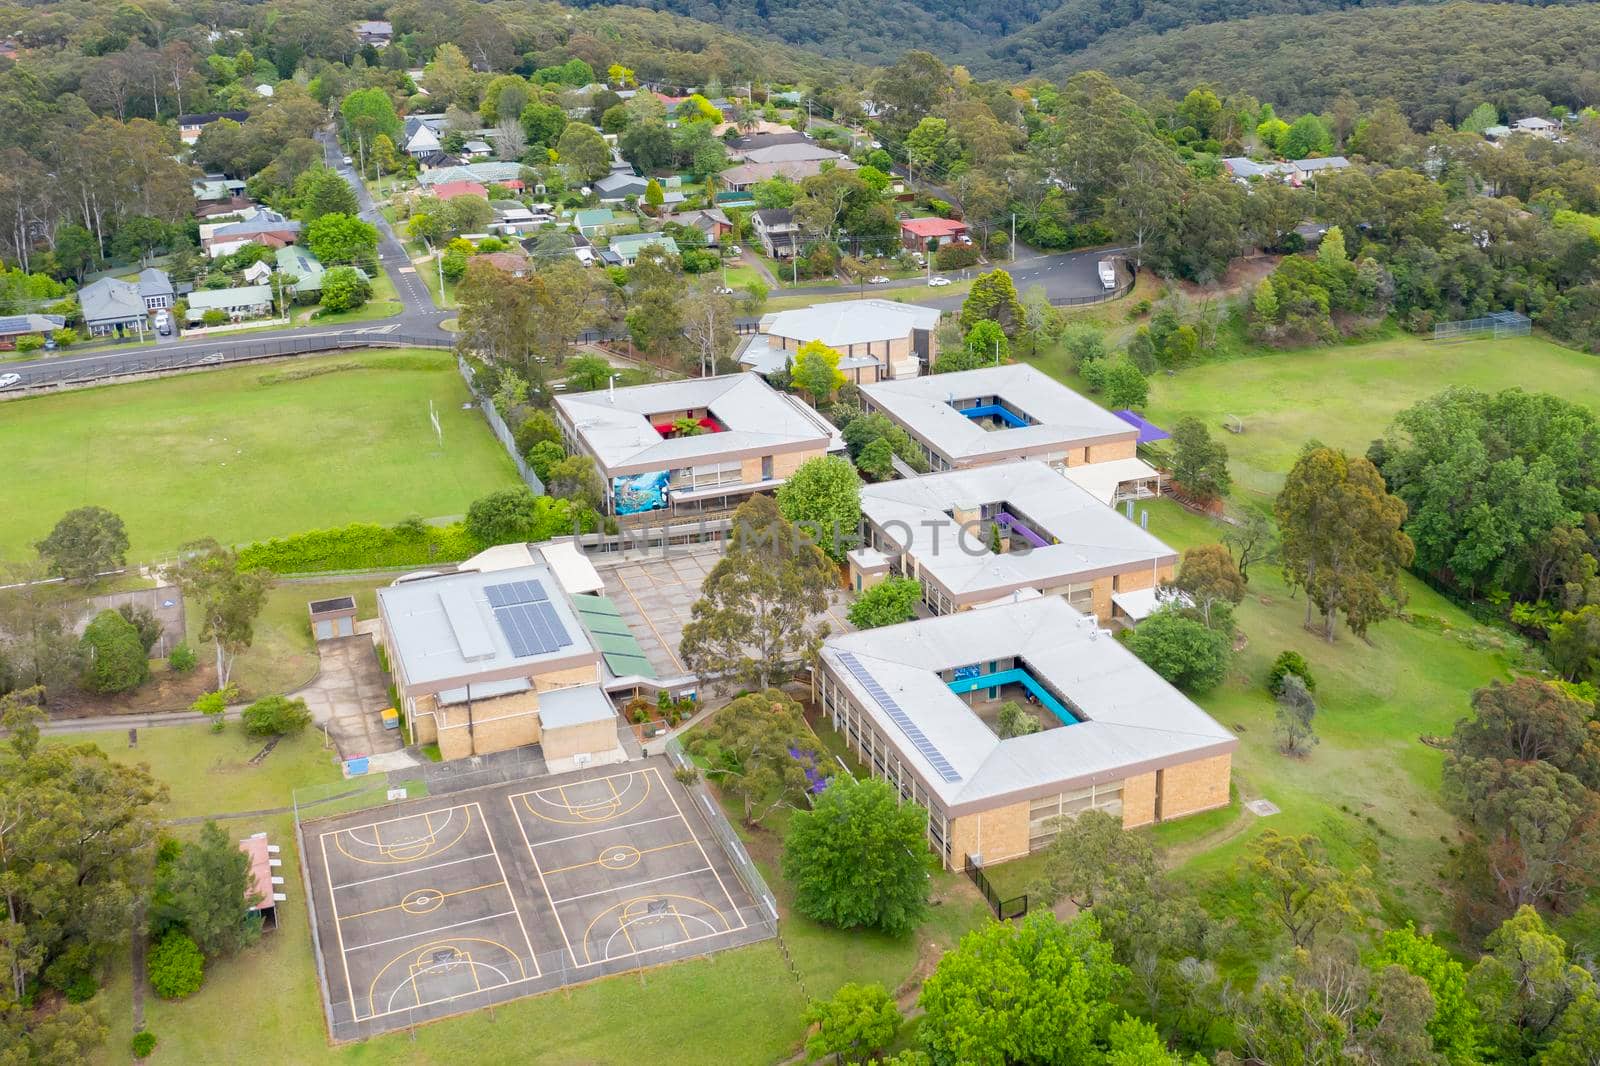 Aerial view of Springwood High School in The Blue Mountains in regional New South Wales in Australia